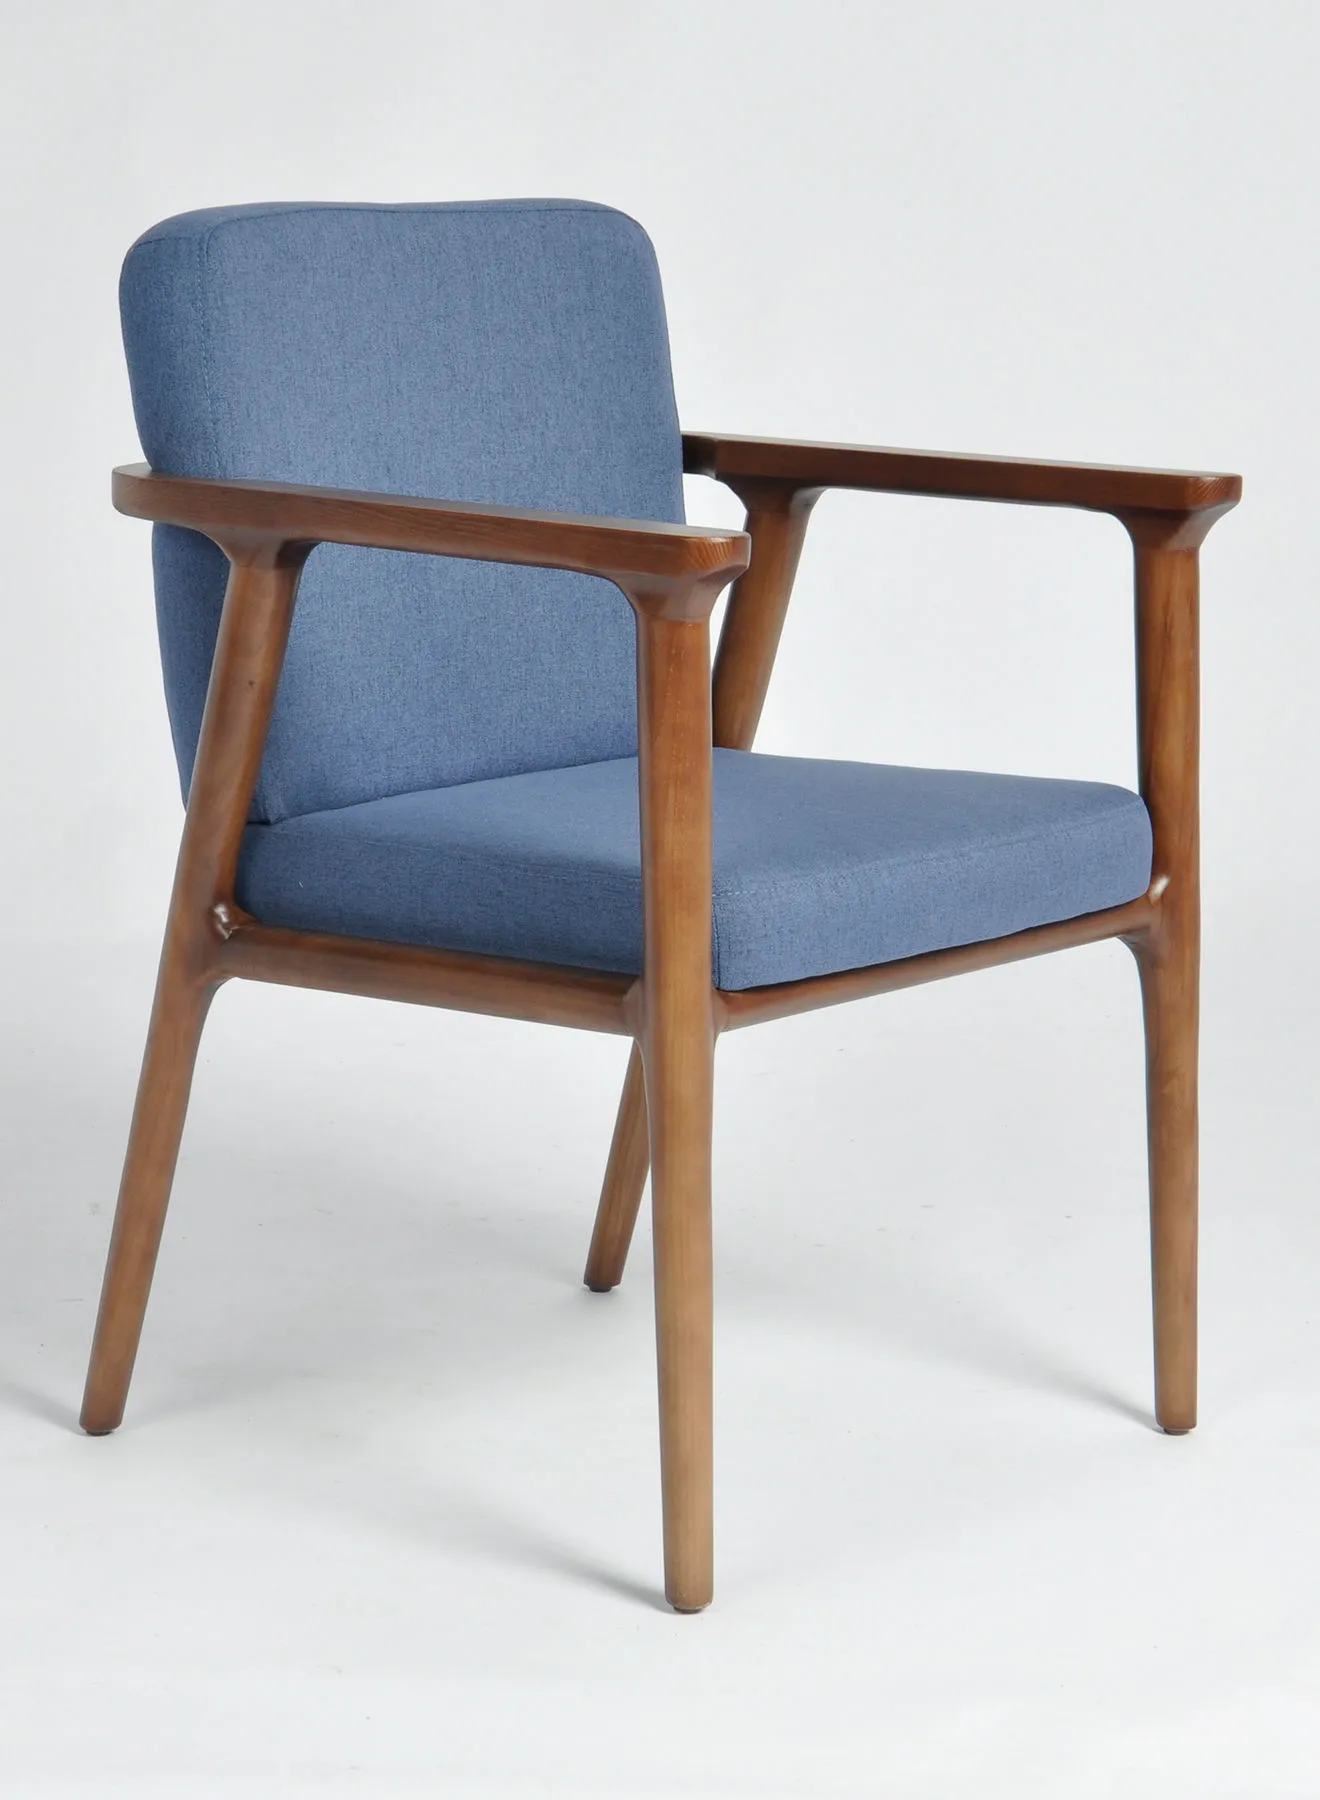 Switch Dining Chair In Blue/Walnut Wooden Chair Size 57 X 58 X 83cm